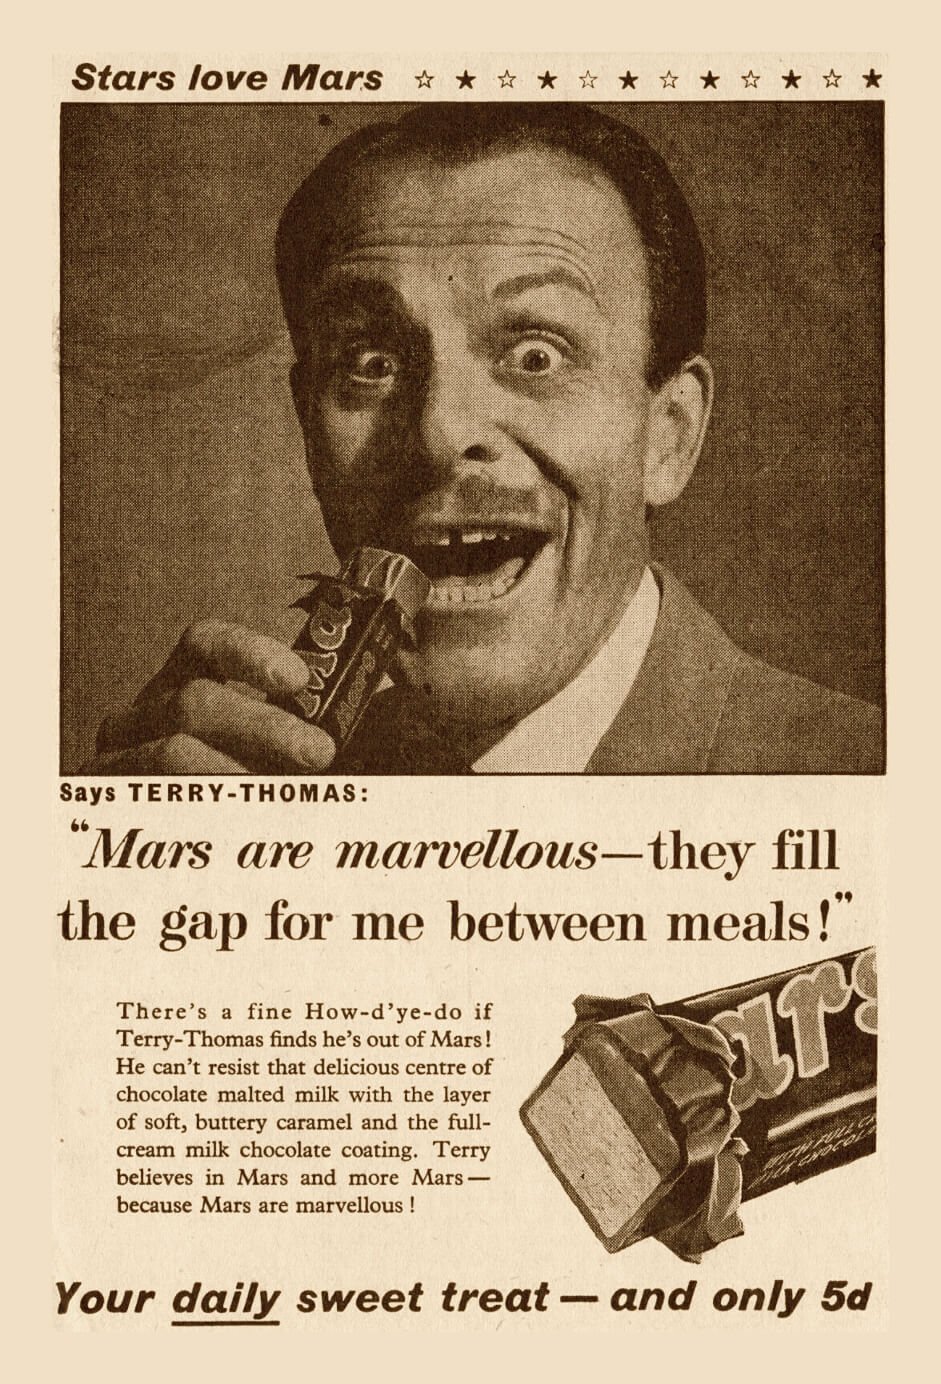 Terry Thomas in a Mars Are Marvellous advert (1953)